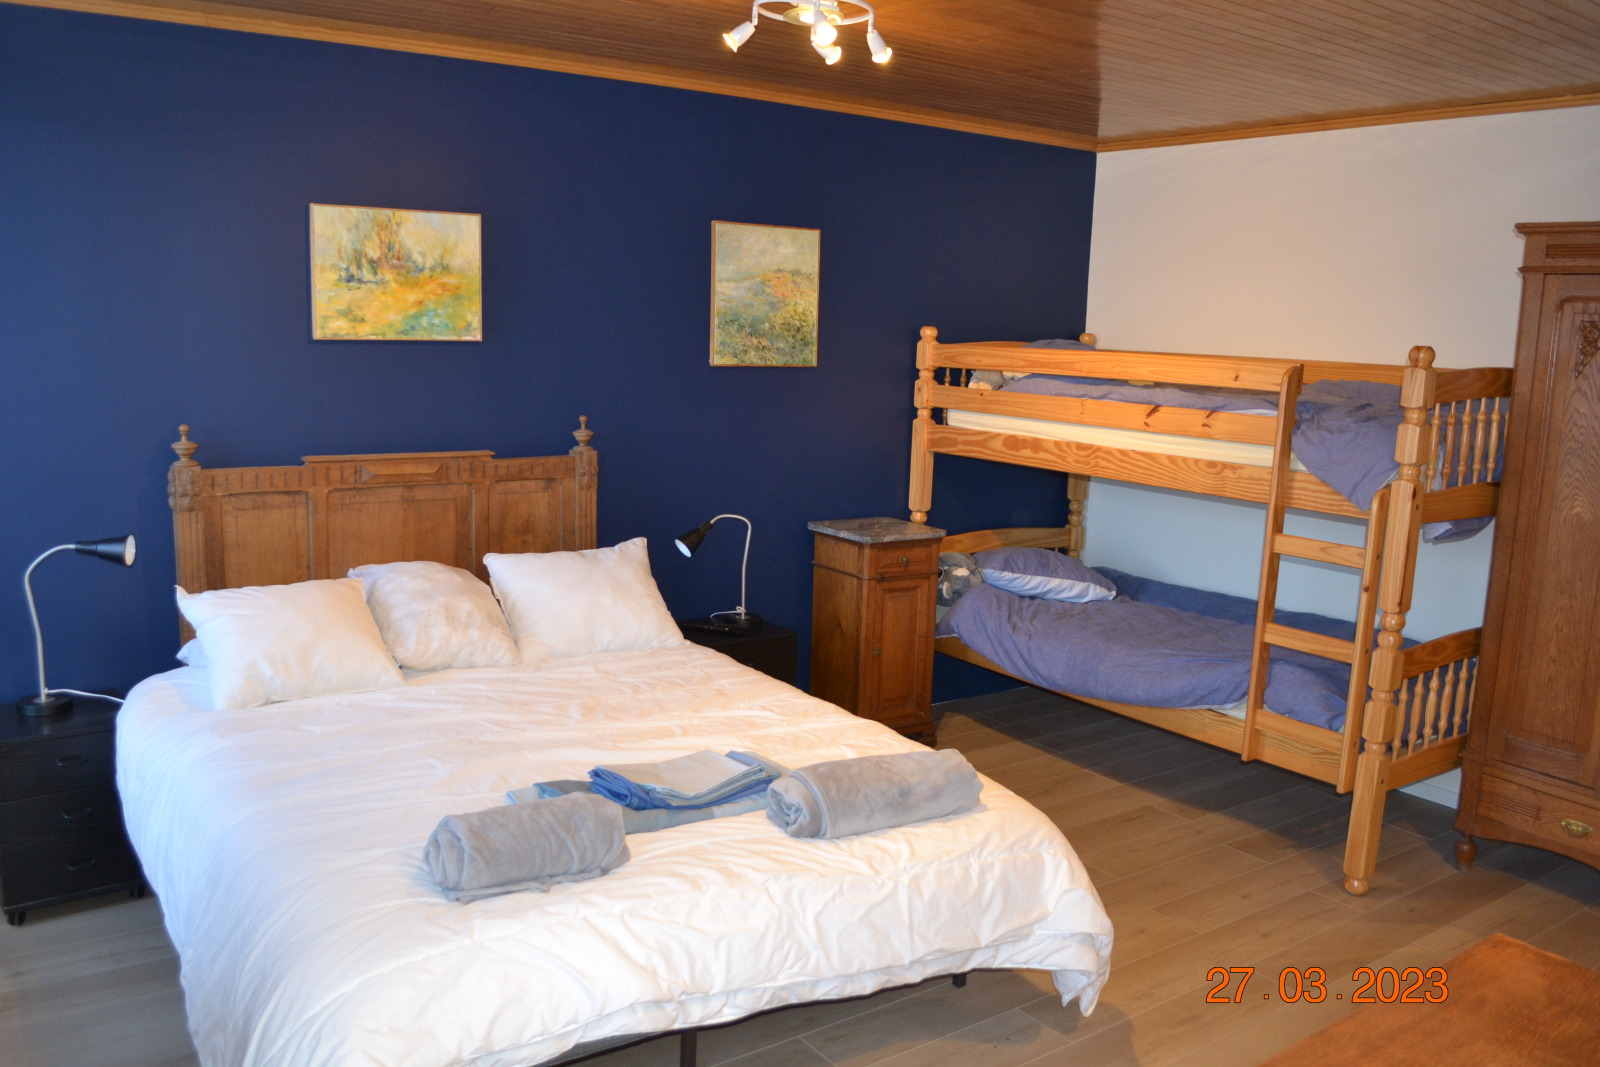 Bedroom with a double bed and bunk beds for children at Les Chambres d'Eole guest house in Tournai